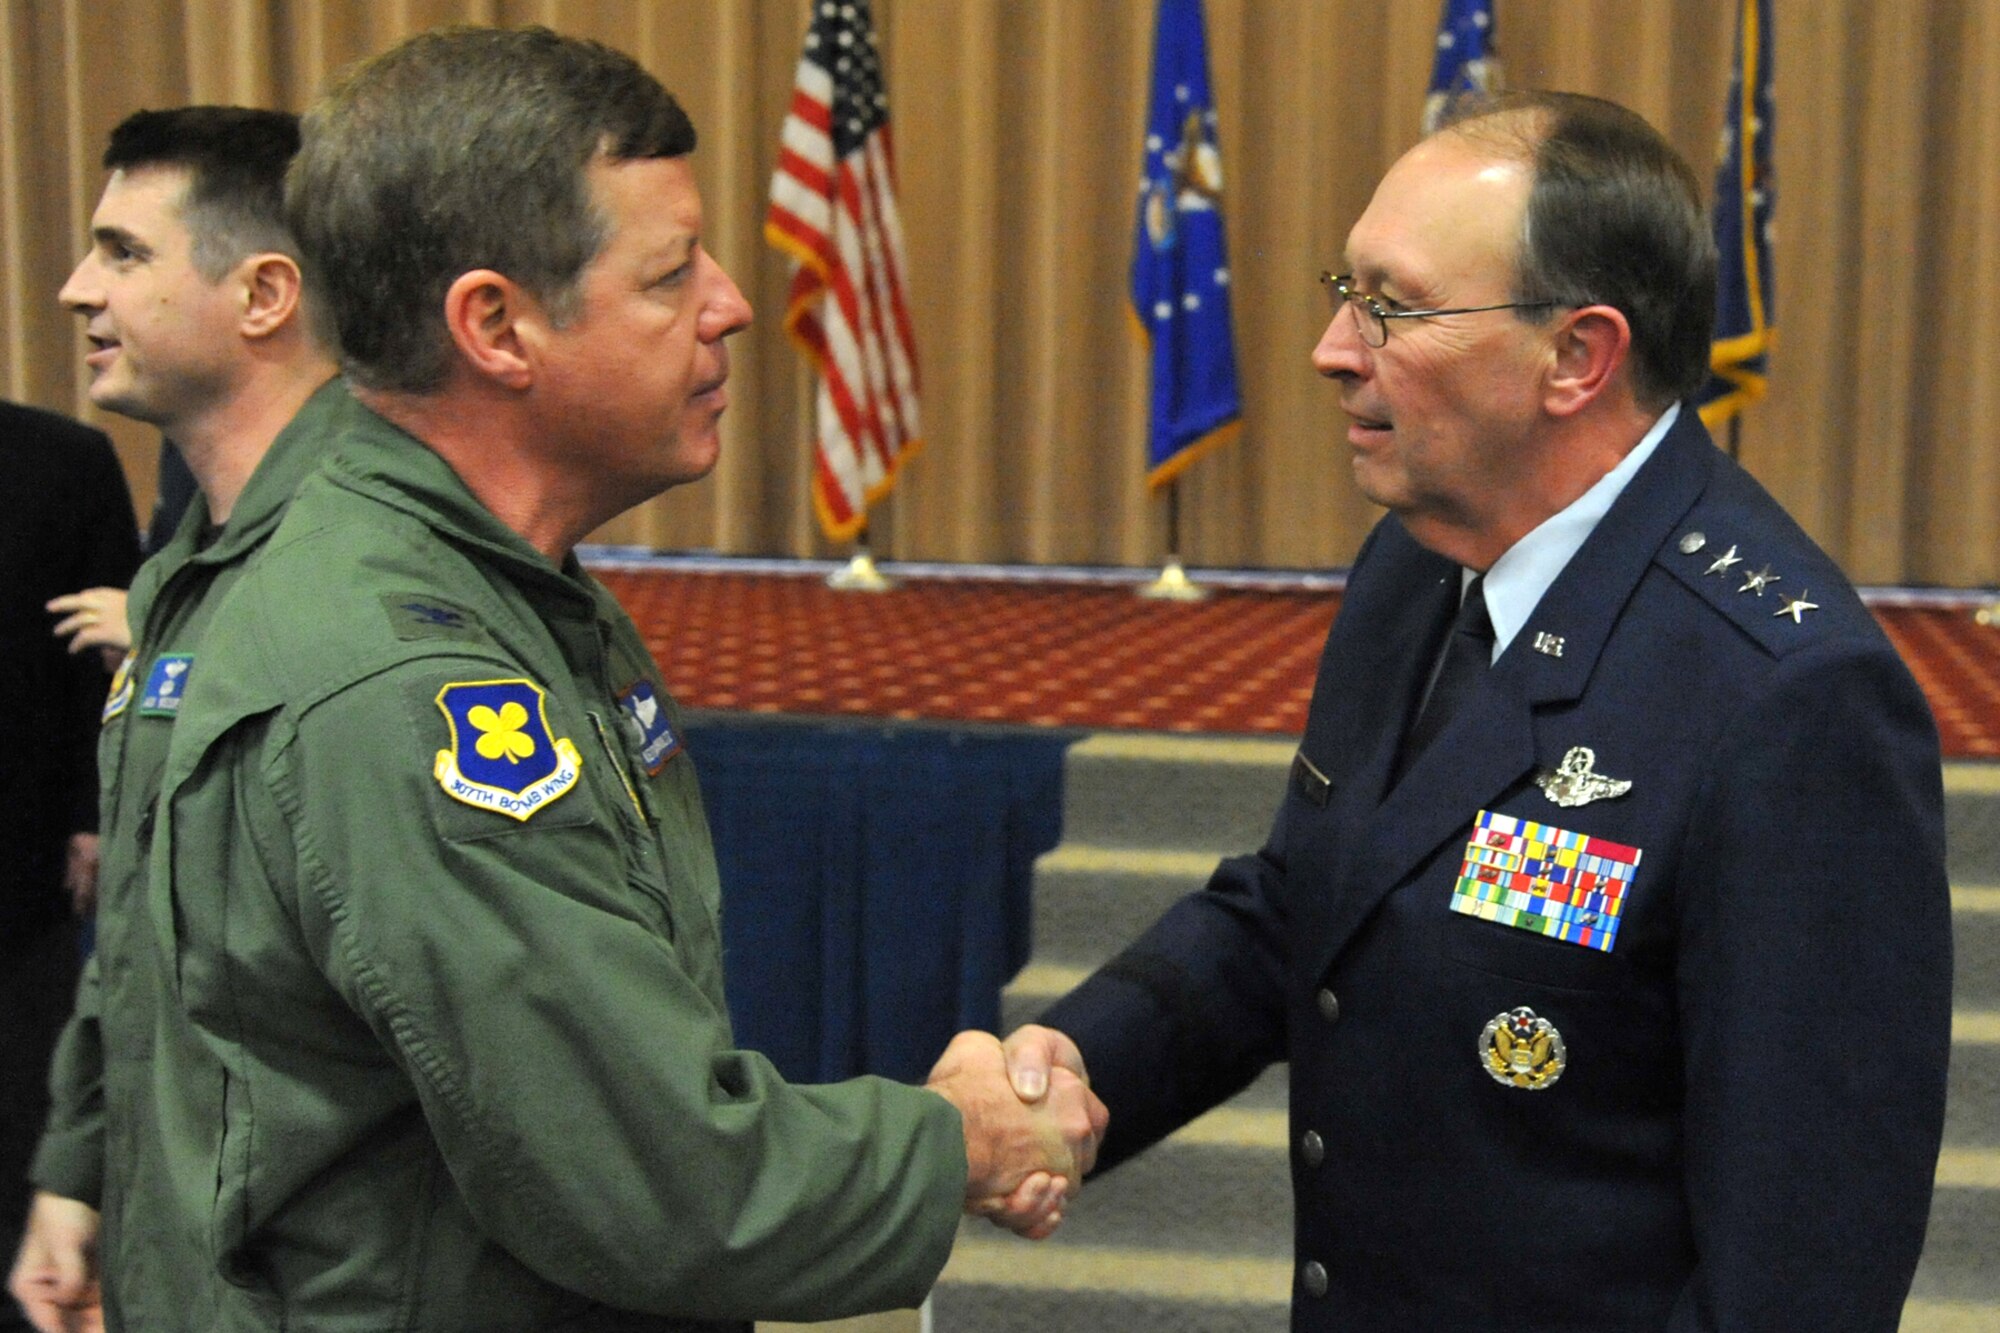 Lt. Gen. Charles E. Stenner Jr., commander of the Air Force Reserve Command, speaks with Col. Keith Schultz, commander, 307th Operations Group, after reactivation ceremonies for the 307th Bomb Wing at Barksdale Air Force Base, La., Jan. 8, 2011. Colonel Schultz is wearing the new 307th BW patch on his shoulder. As for the historic meaning of the original design, ultramarine blue is the color of the Air Forces. The four petals of the dog wood stands for the four combat squadrons of the group with the stem representing the headquarters binding the four groups together. During the same ceremonies, the 917th Operations Group was re-designated as the 917th Fighter Group and the 917th Wing was deactivated. (U.S. Air Force photo/Staff Sgt. Travis Robertson)